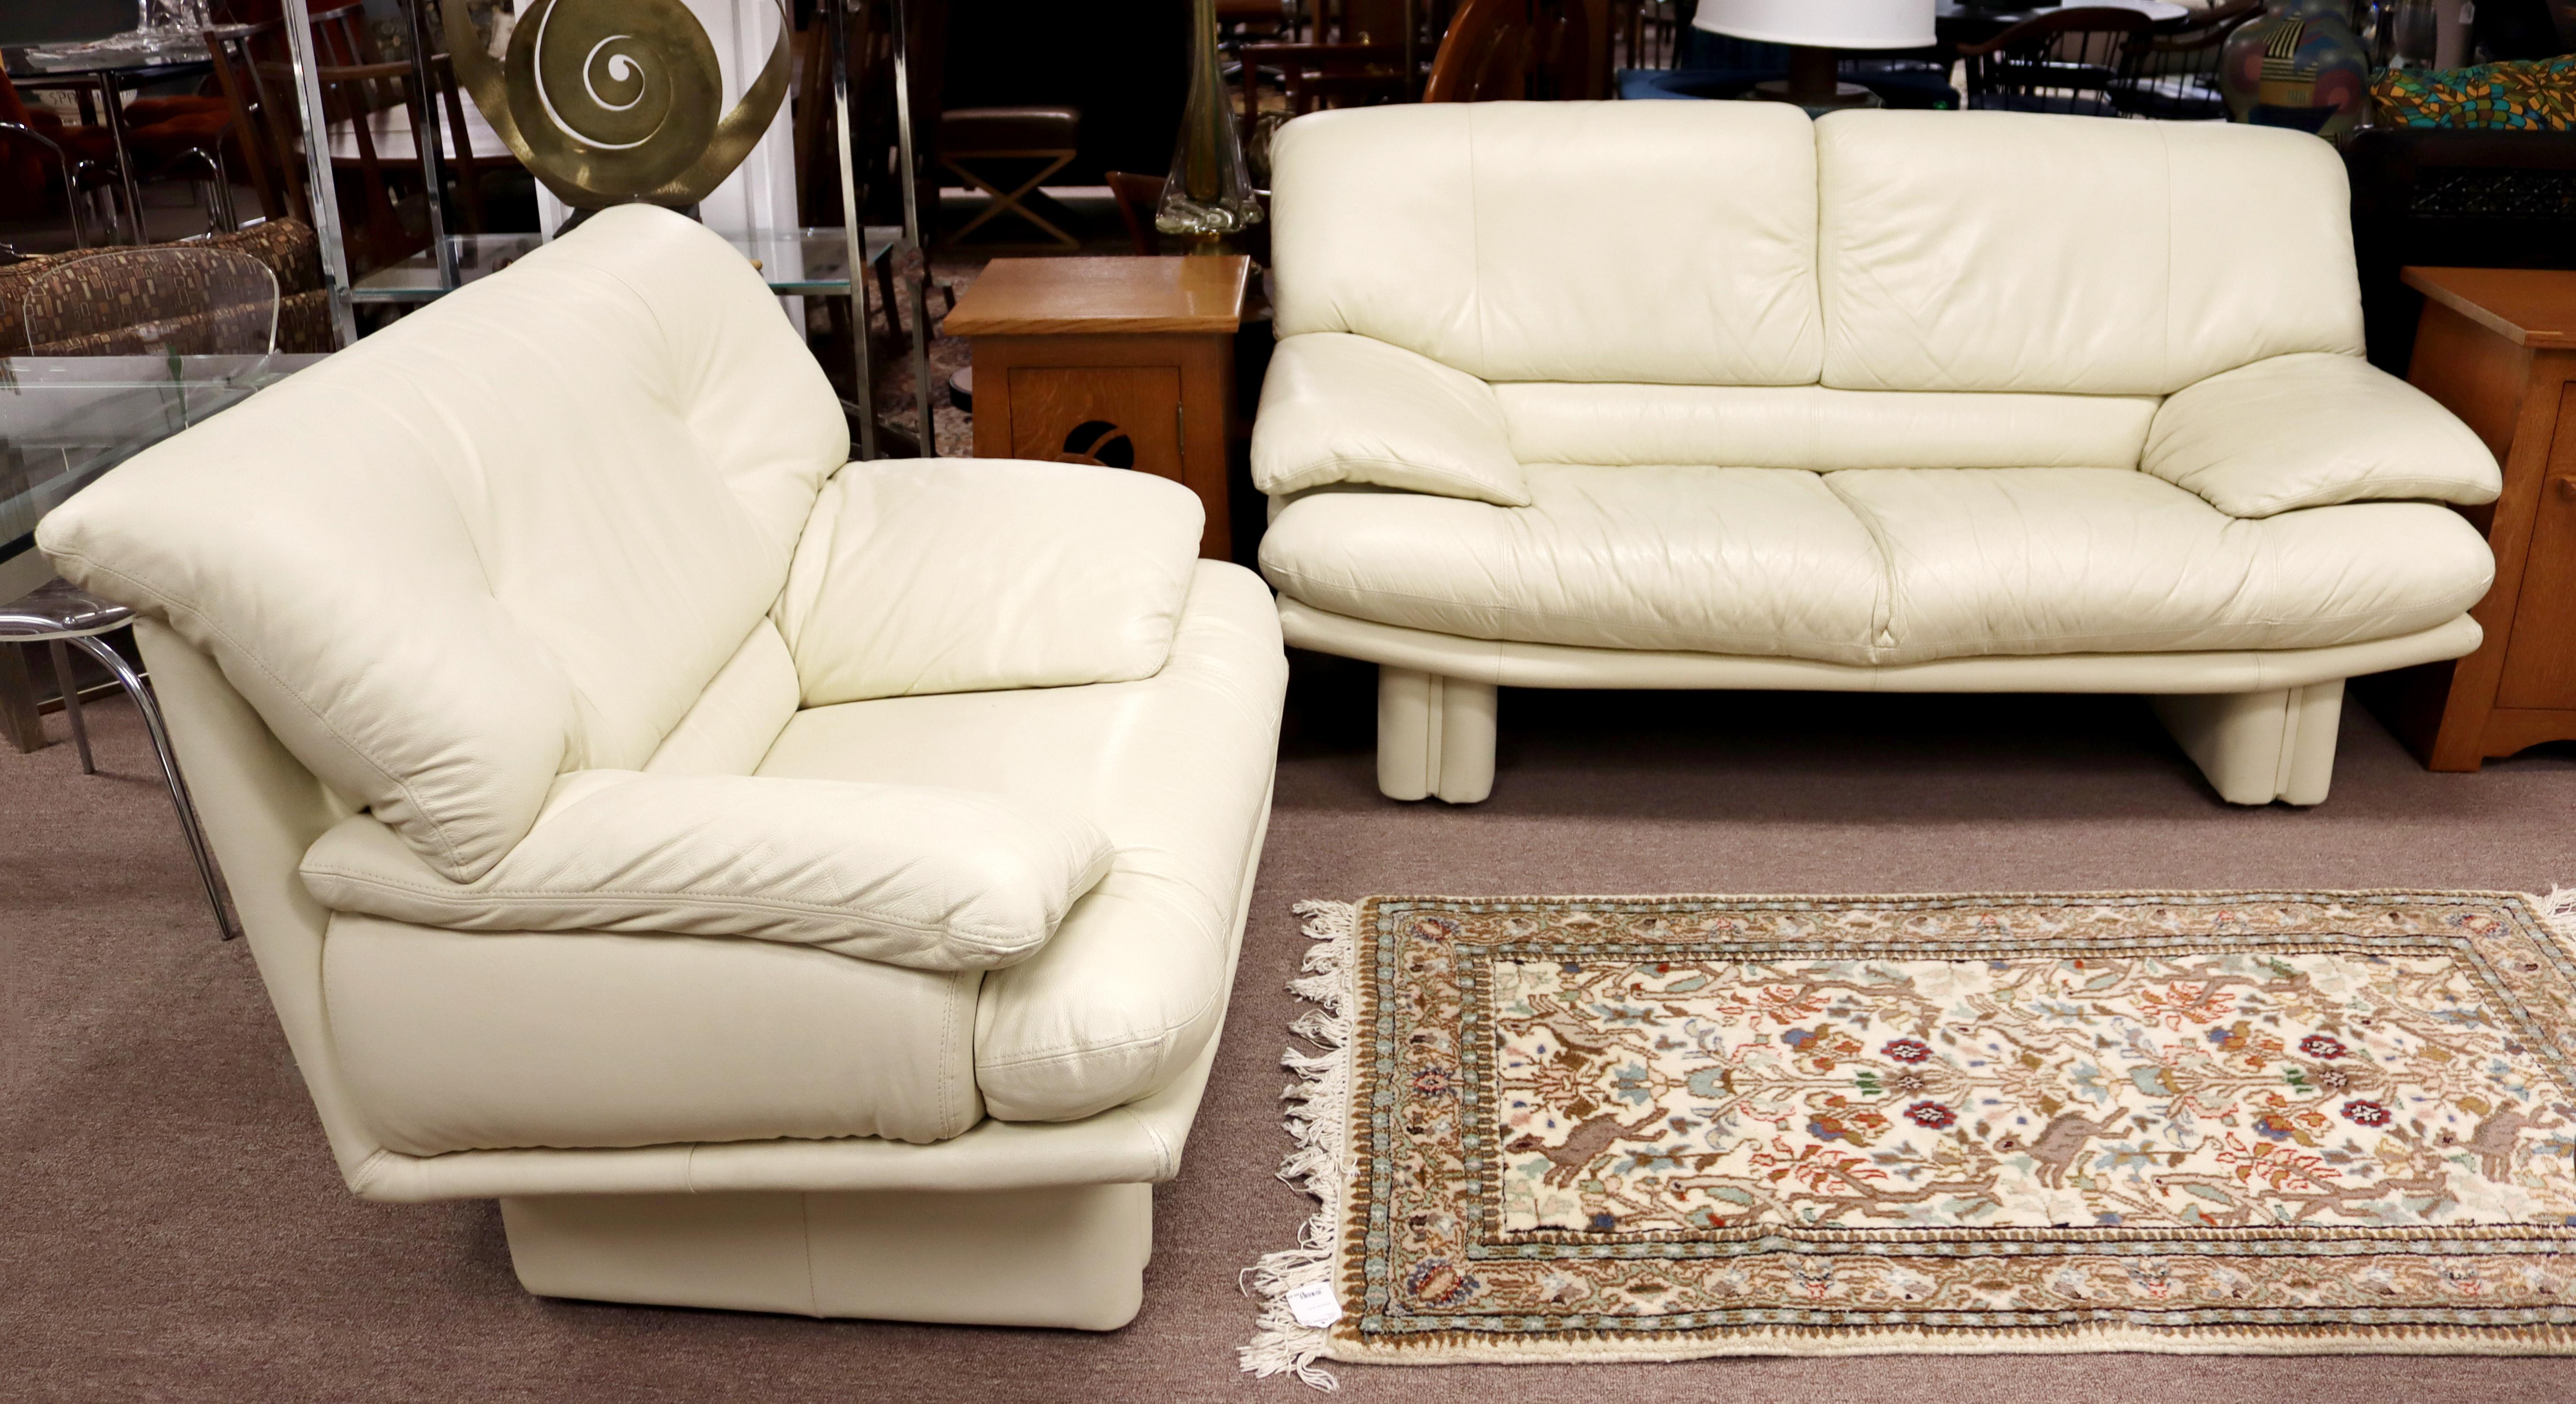 For your consideration is a comfortable and chic sofa and lounge chair set. In excellent condition. The dimensions of the chair are 46